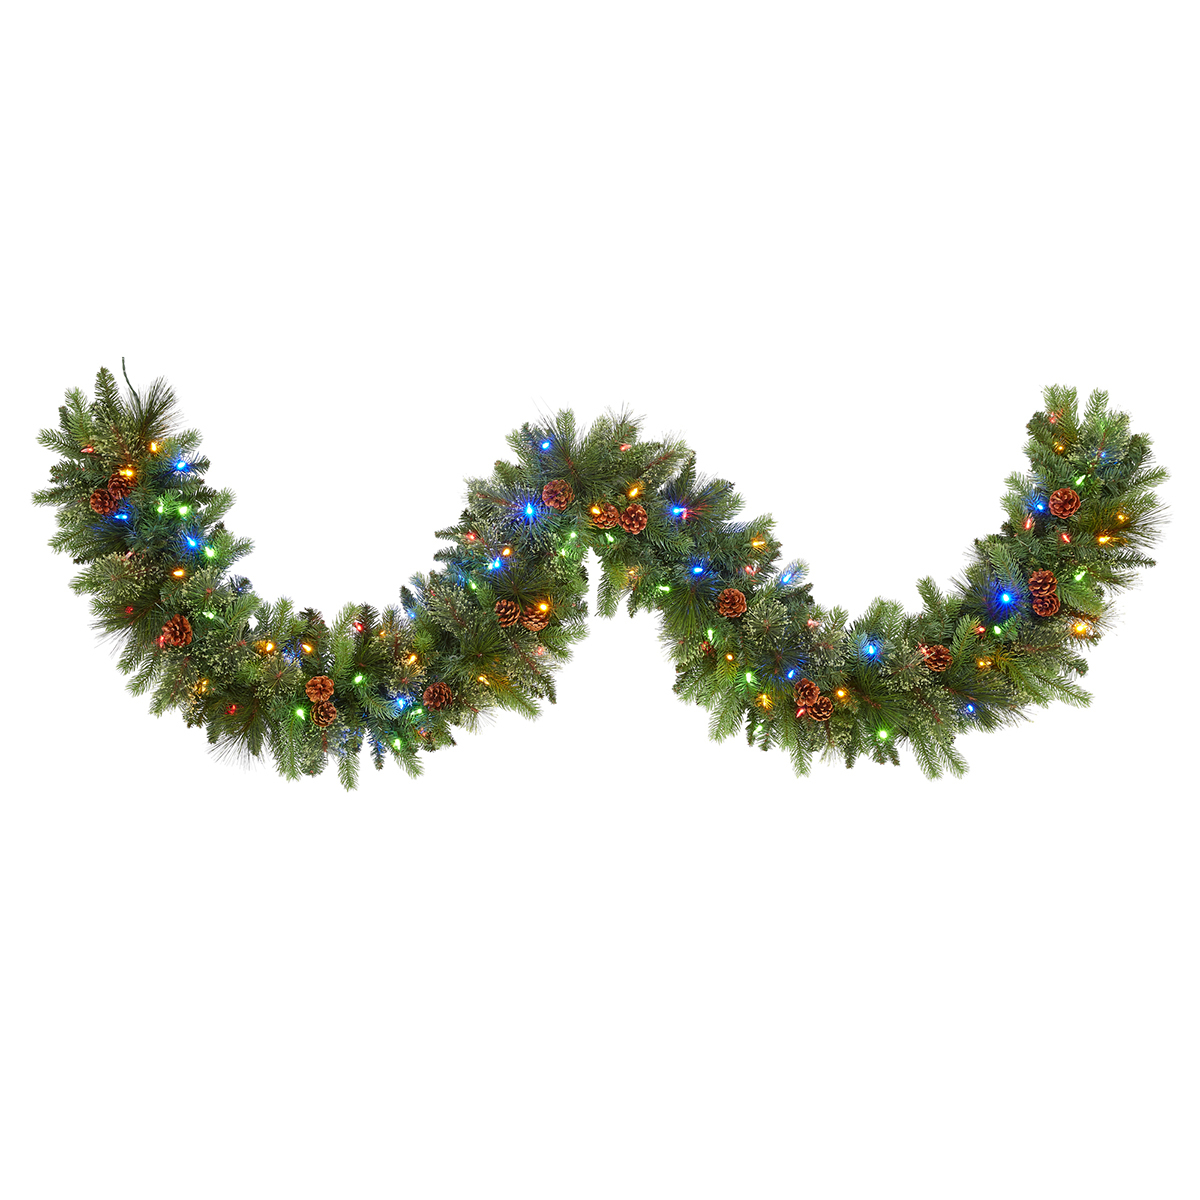 Dual colour garland on white background